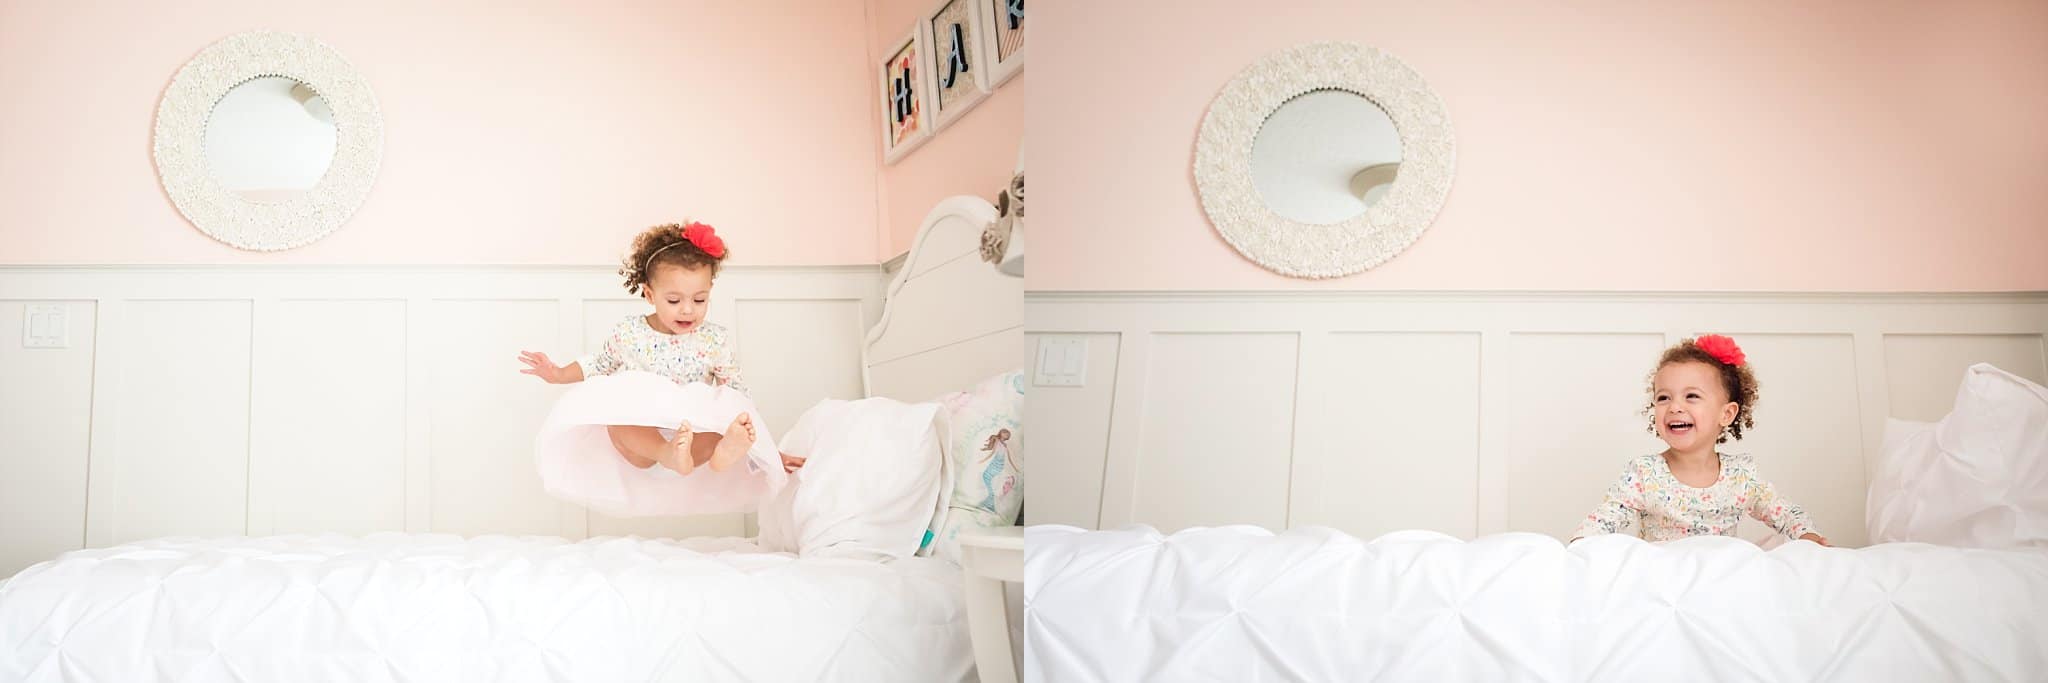 St Augustine Lifestyle Photographer little girl jumping on white bed surrounded by blush walls